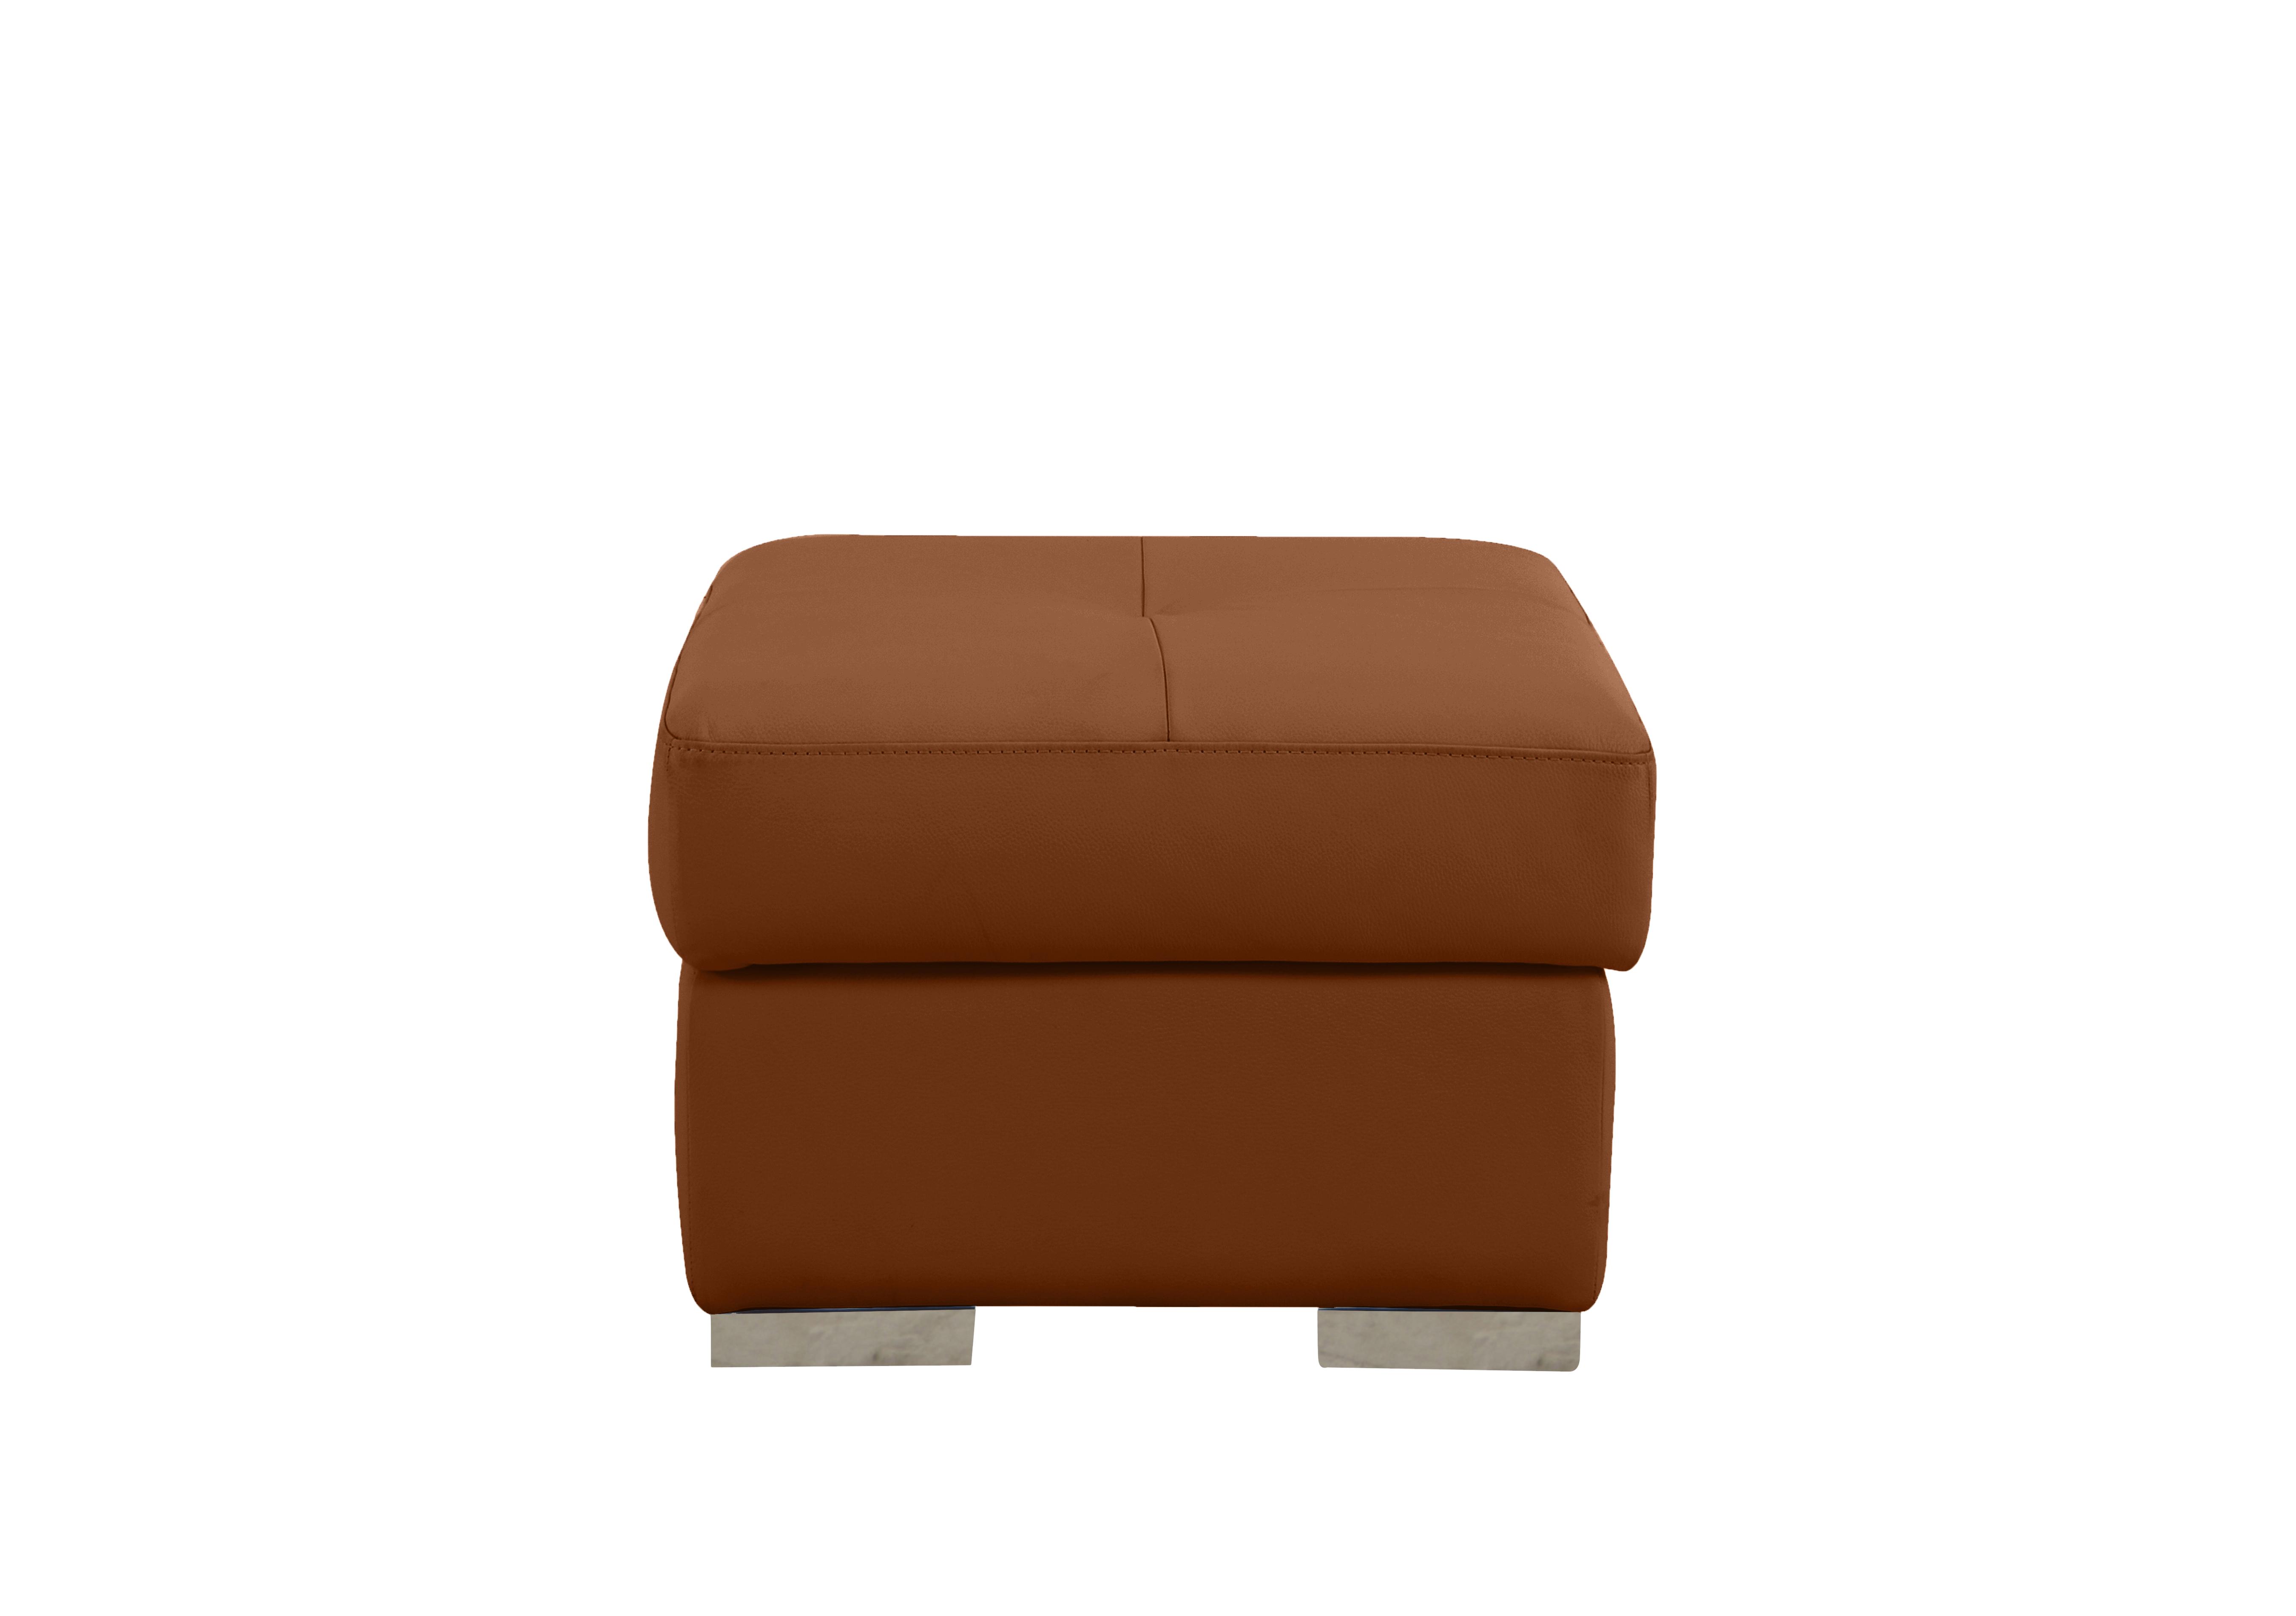 Galileo Leather Storage Footstool in Botero Cuoio 2151 Ch on Furniture Village